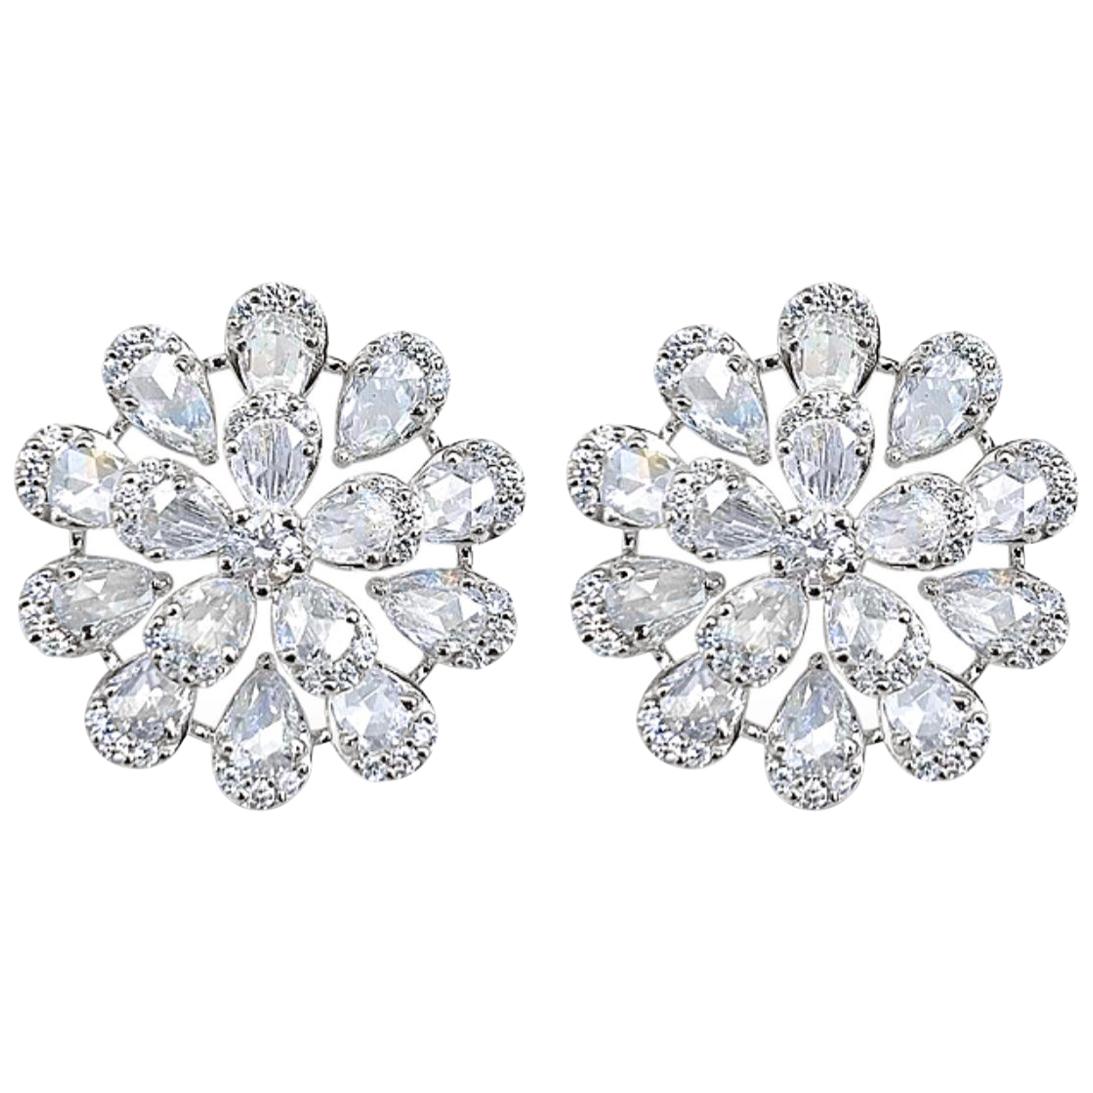 Round and Pear Shape Rose Cut Diamond Stud Earrings in 18 Karat White Gold